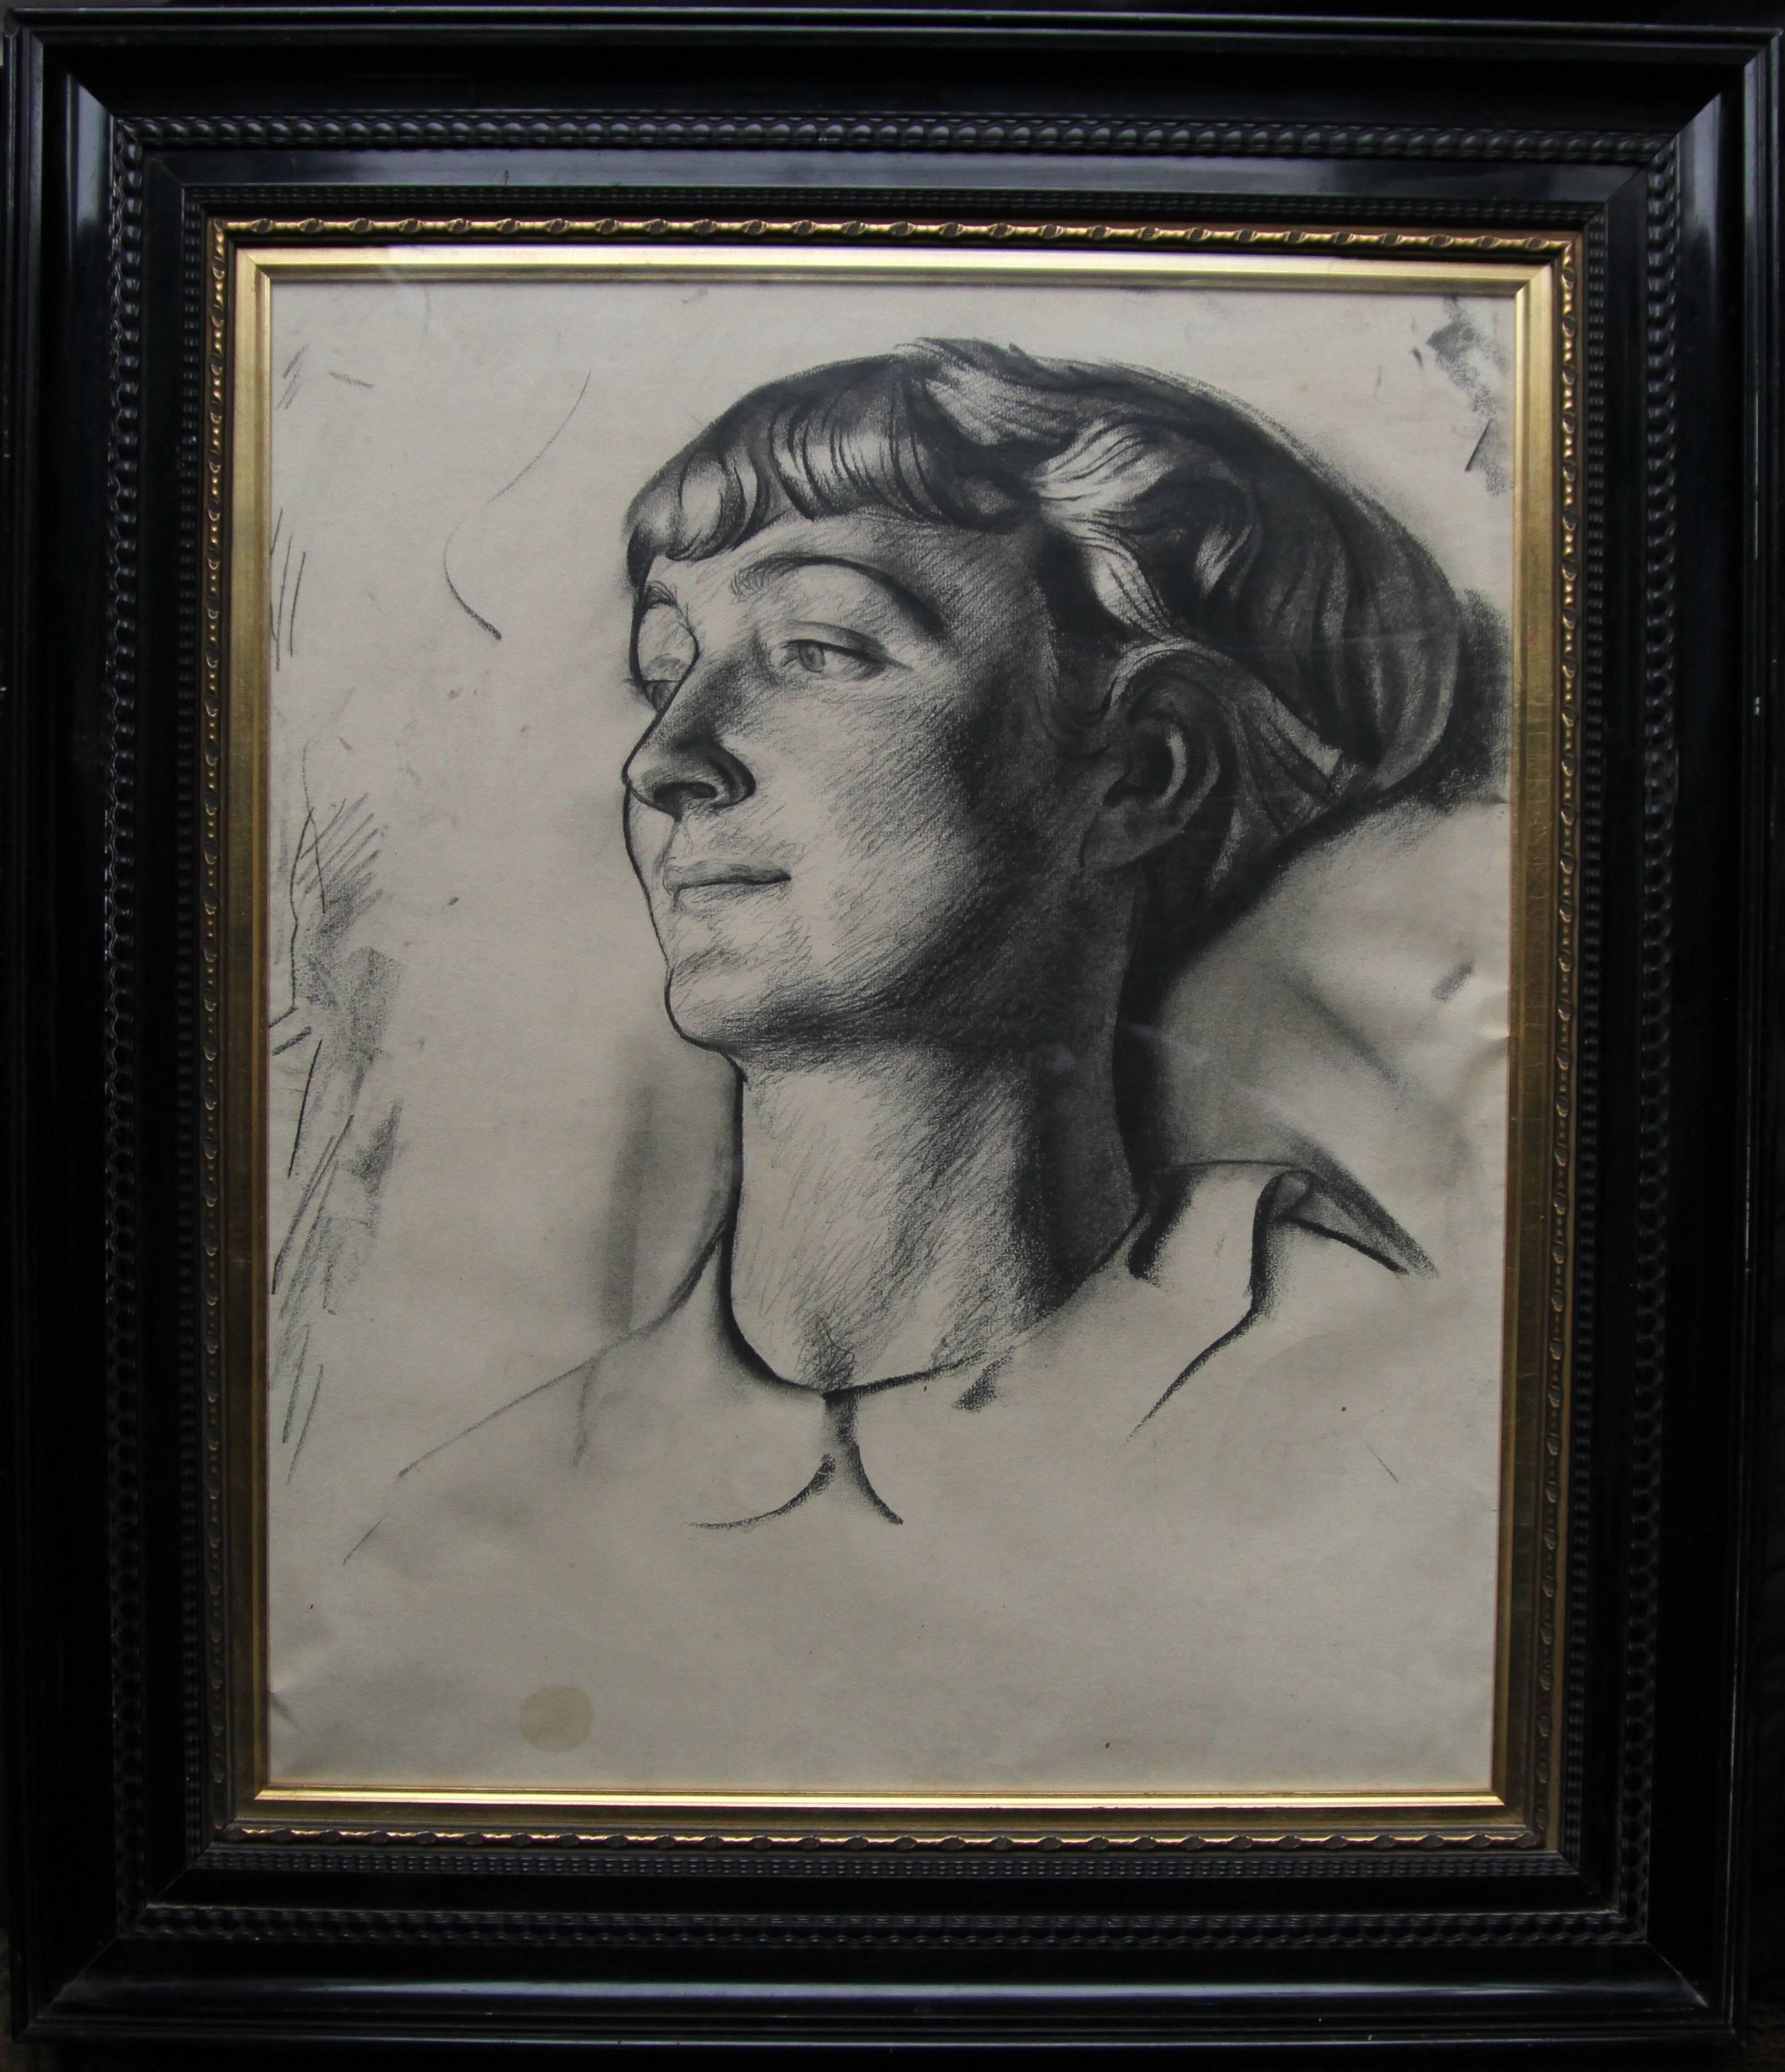 A fine large charcoal and pencil drawing by British listed artist James Stroudley. Executed in 1931, it is a stunning example of a 1930s Art Deco portrait. Very strong and bold, it depicts a portrait of a young woman. It is very evocative and is in